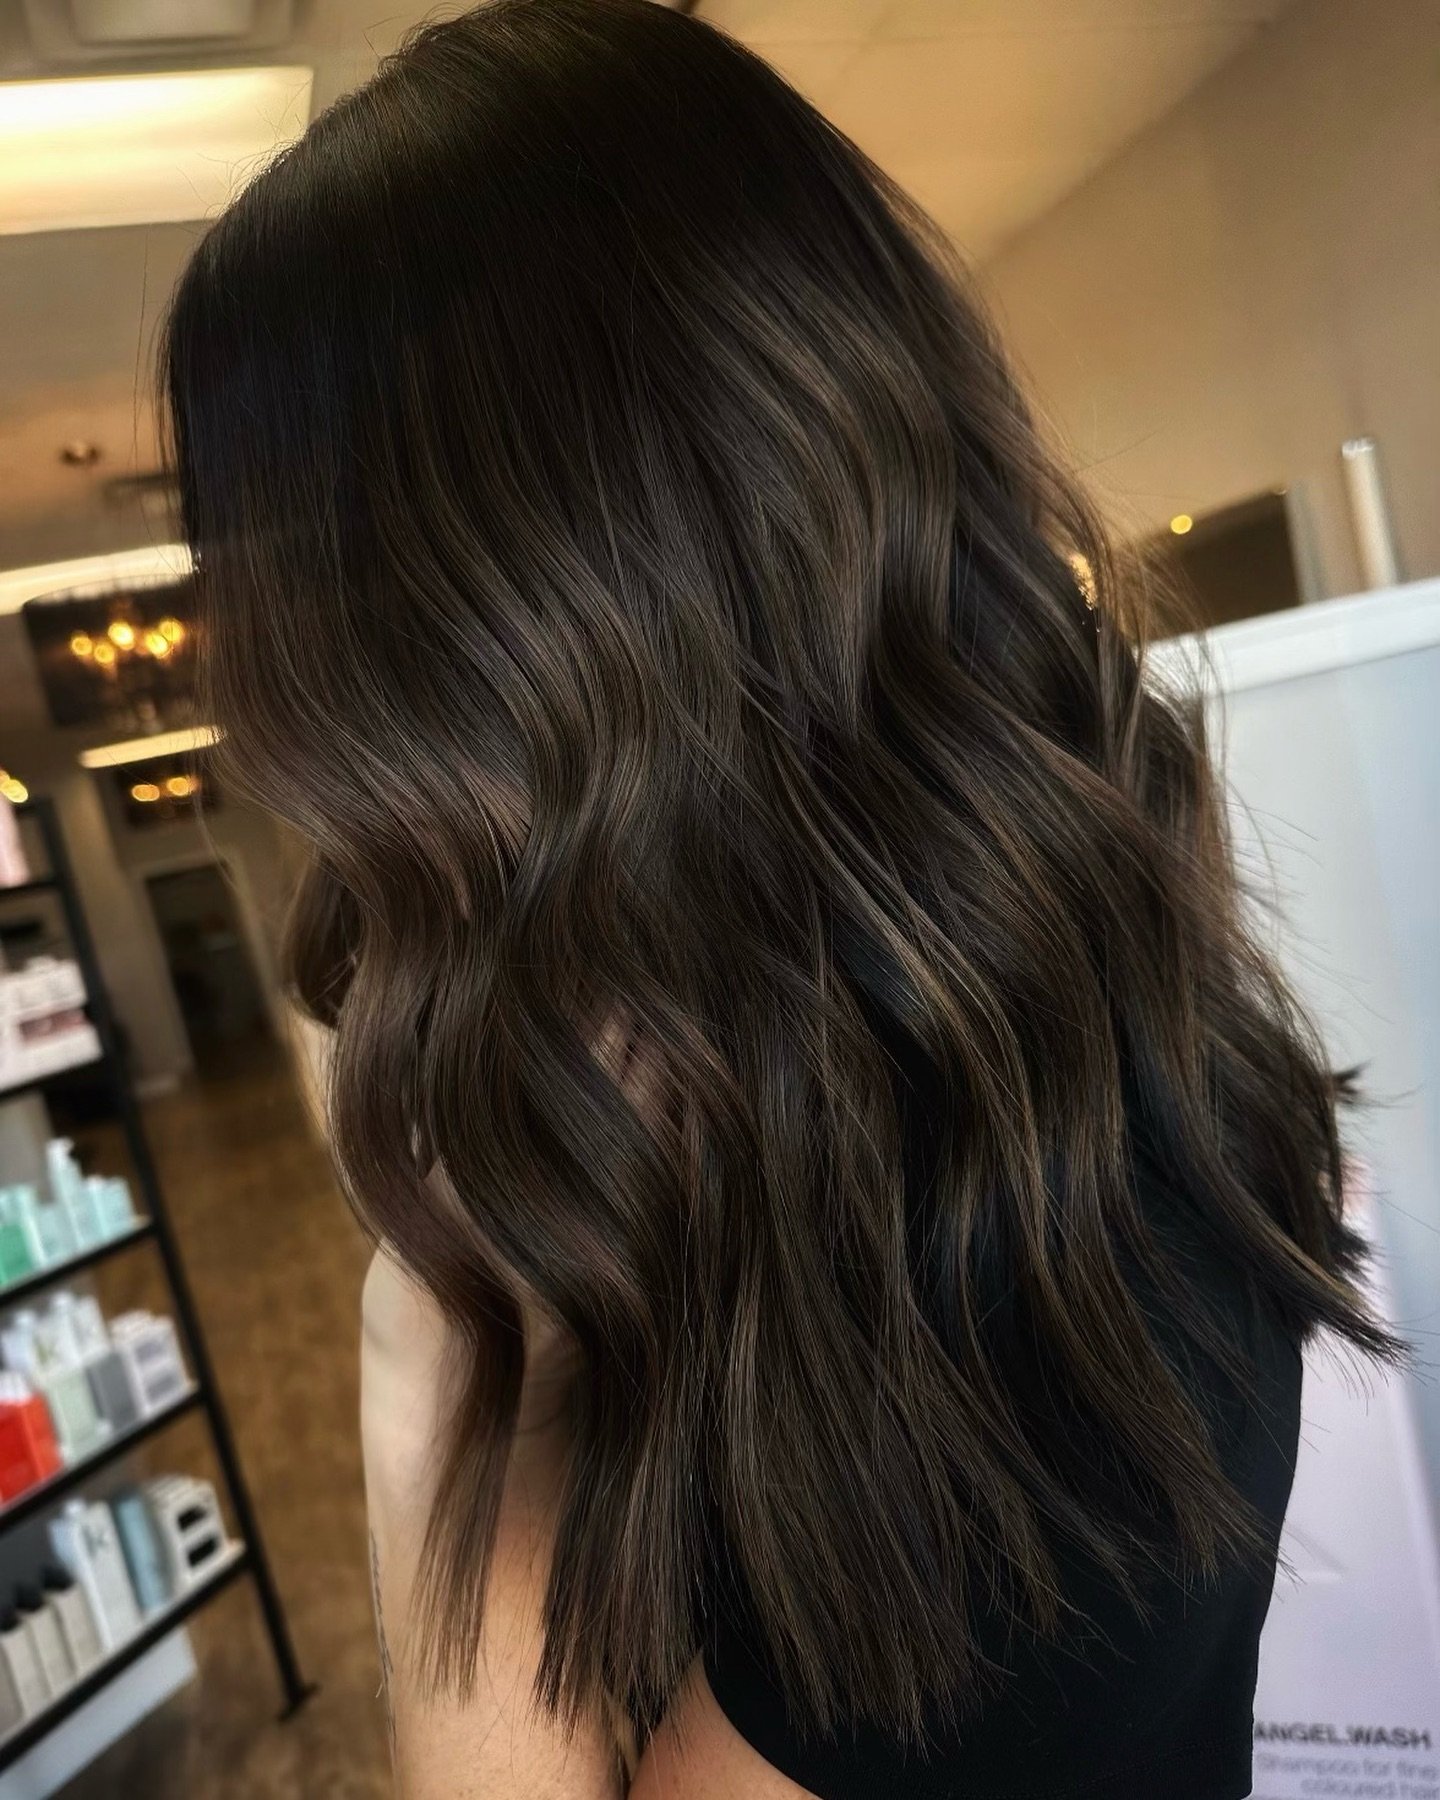 Brunettes are taking over the world! 🤎
This dimensional brunette is absolutely stunning!